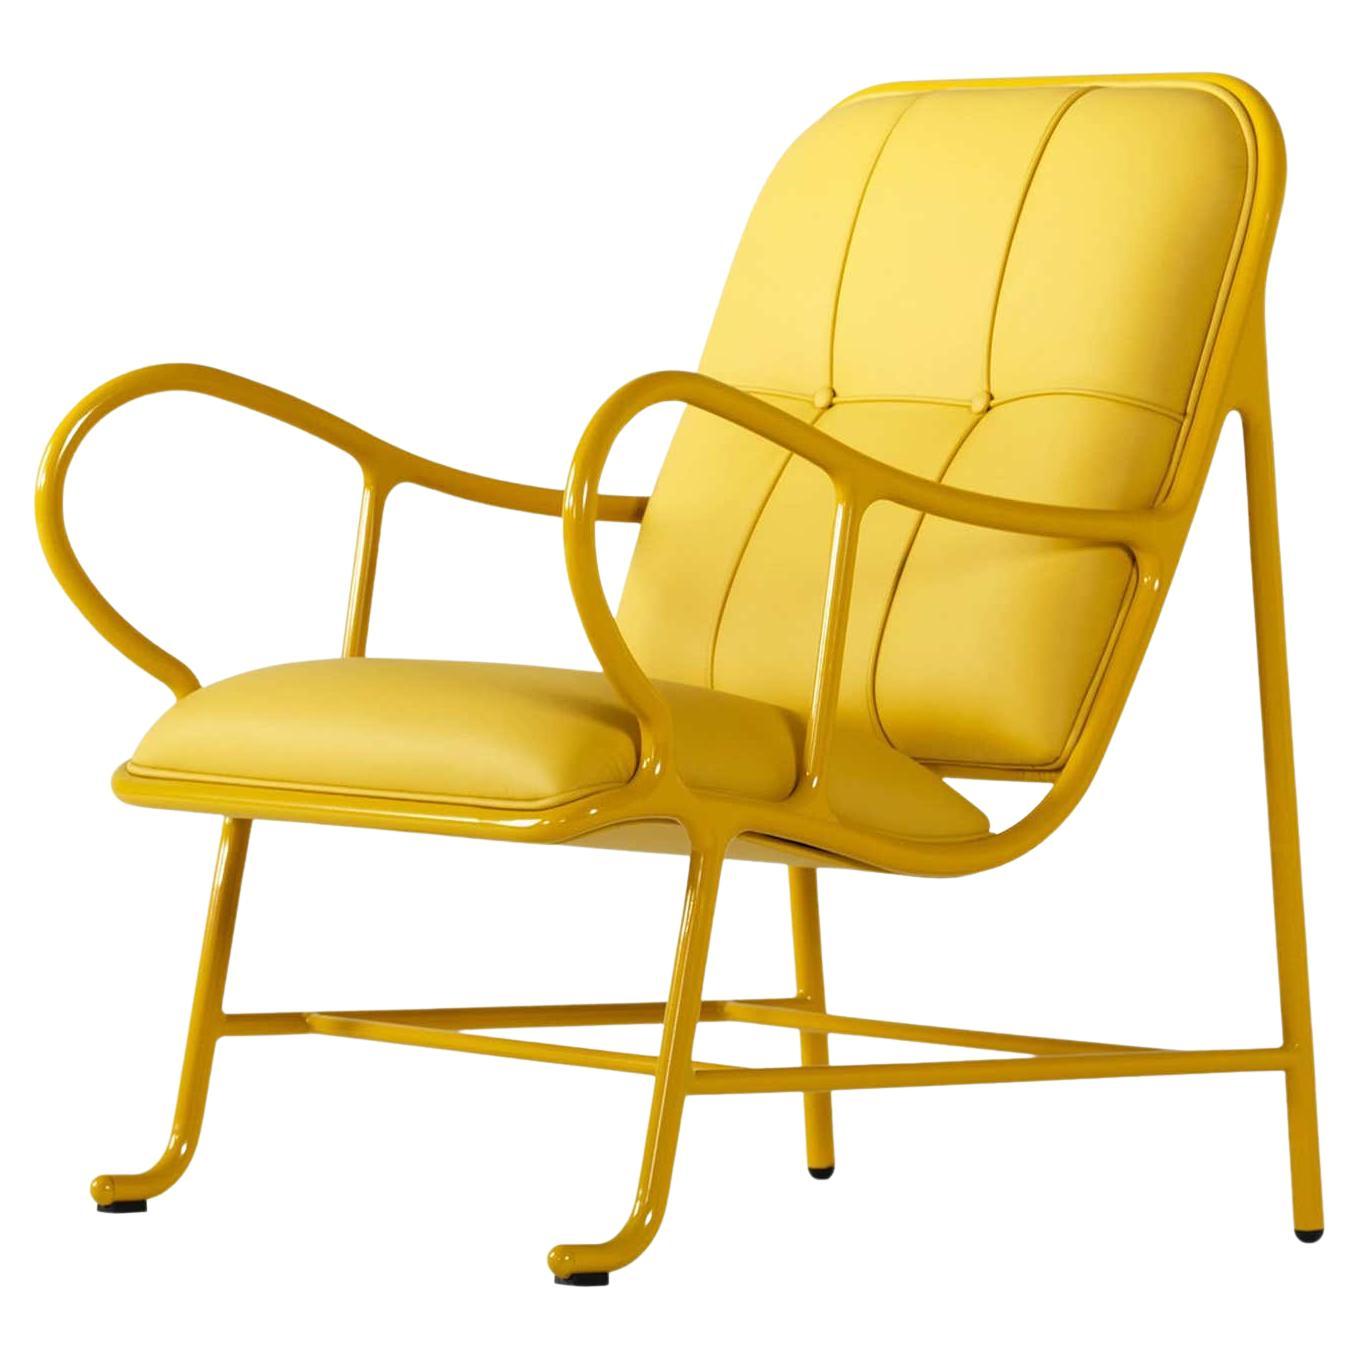 Yellow Gardenias Armchair Living Room with High-Gloss Leather Finish For Sale